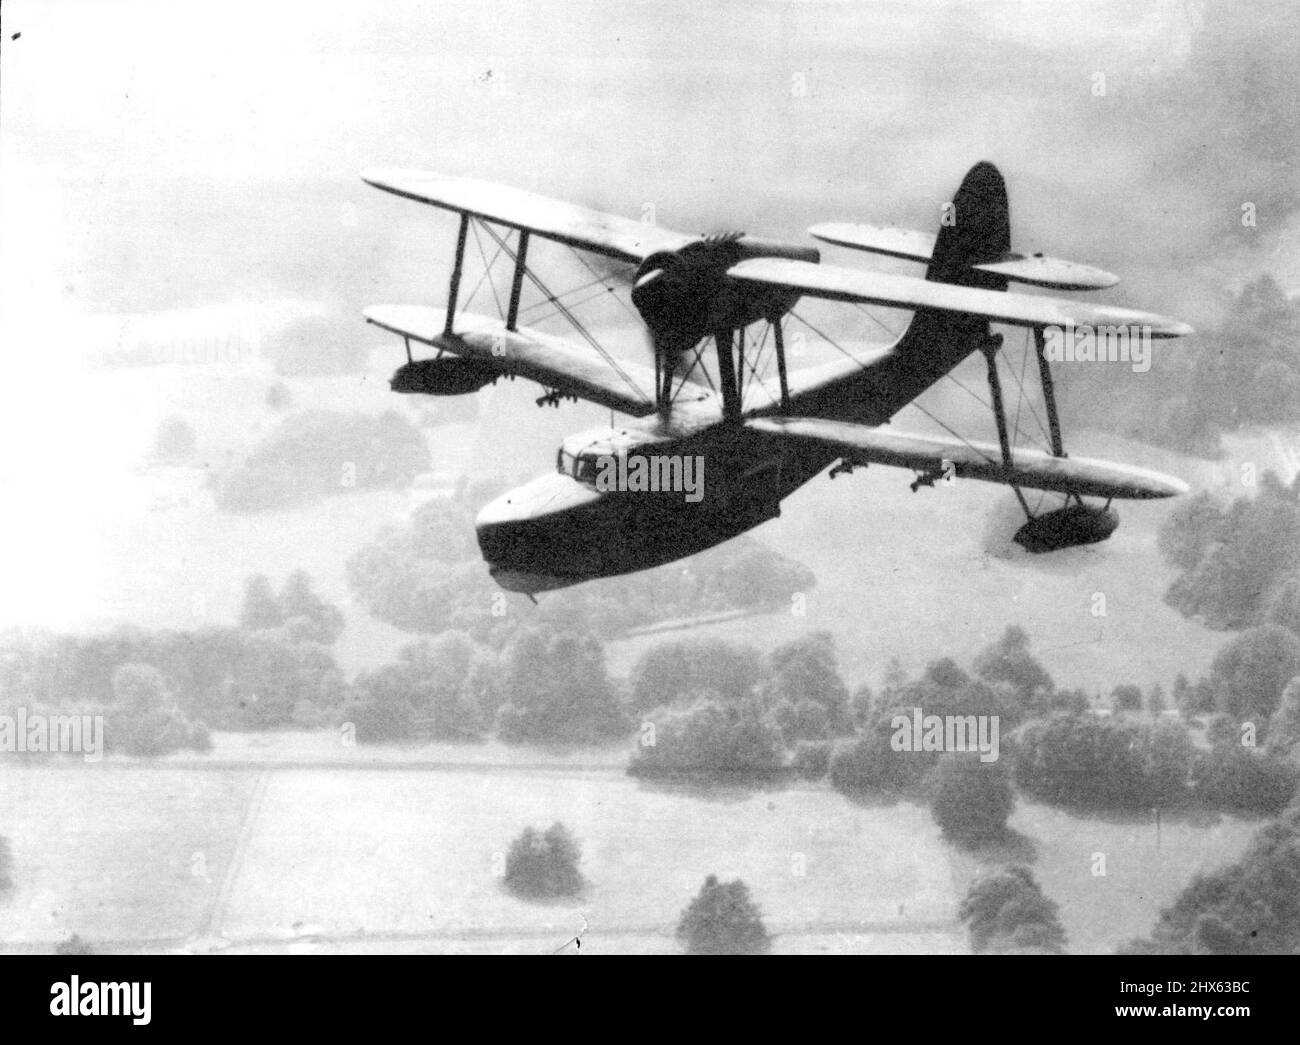 New British Amphibian Biplane Sea Otter Mark I. The Sea Otter I in flight. The Vickers Armstrong Supermarine Sea Otter Mark I is a single-engined amphibian biplane designed for naval spotting, reconnaissance and general-purpose duties. It is also engaged on Air/Sea Rescue. It has catapult equipment, and is powered with a Bristol Mercury 30 engine of 870 m.h.p., driving a ***** three-blade variable pitch constant speed propeller. The main planes are made to fold and the land under-carriage is ret Stock Photo